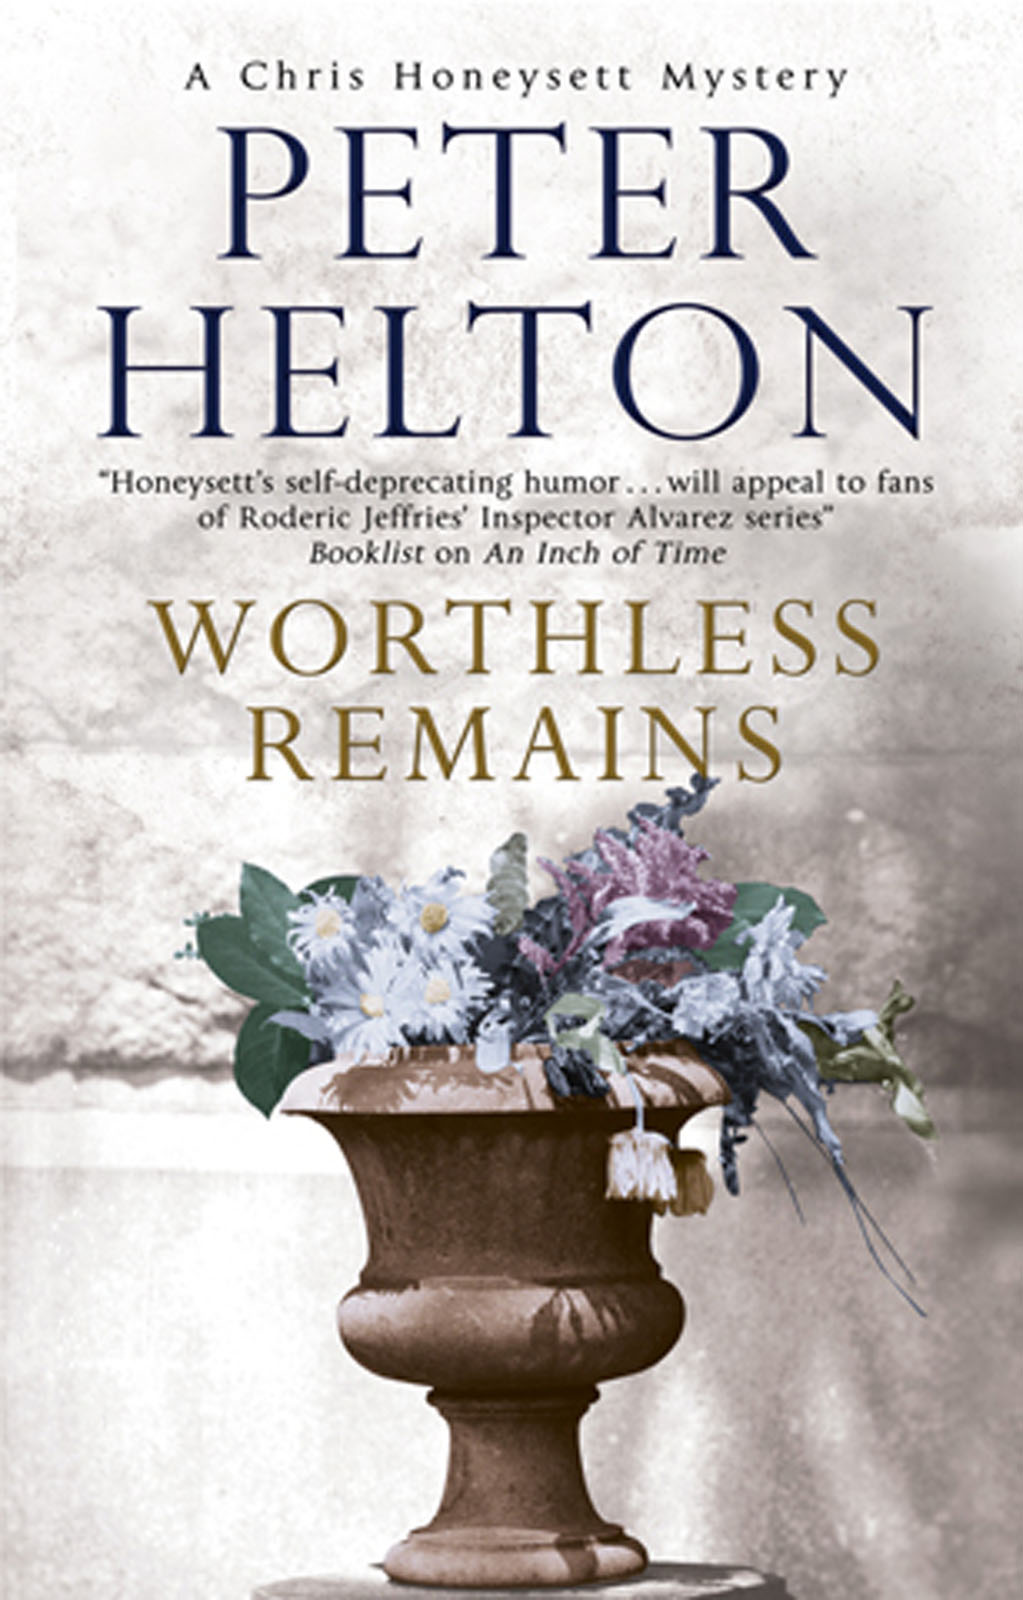 Worthless Remains (2013) by Peter Helton